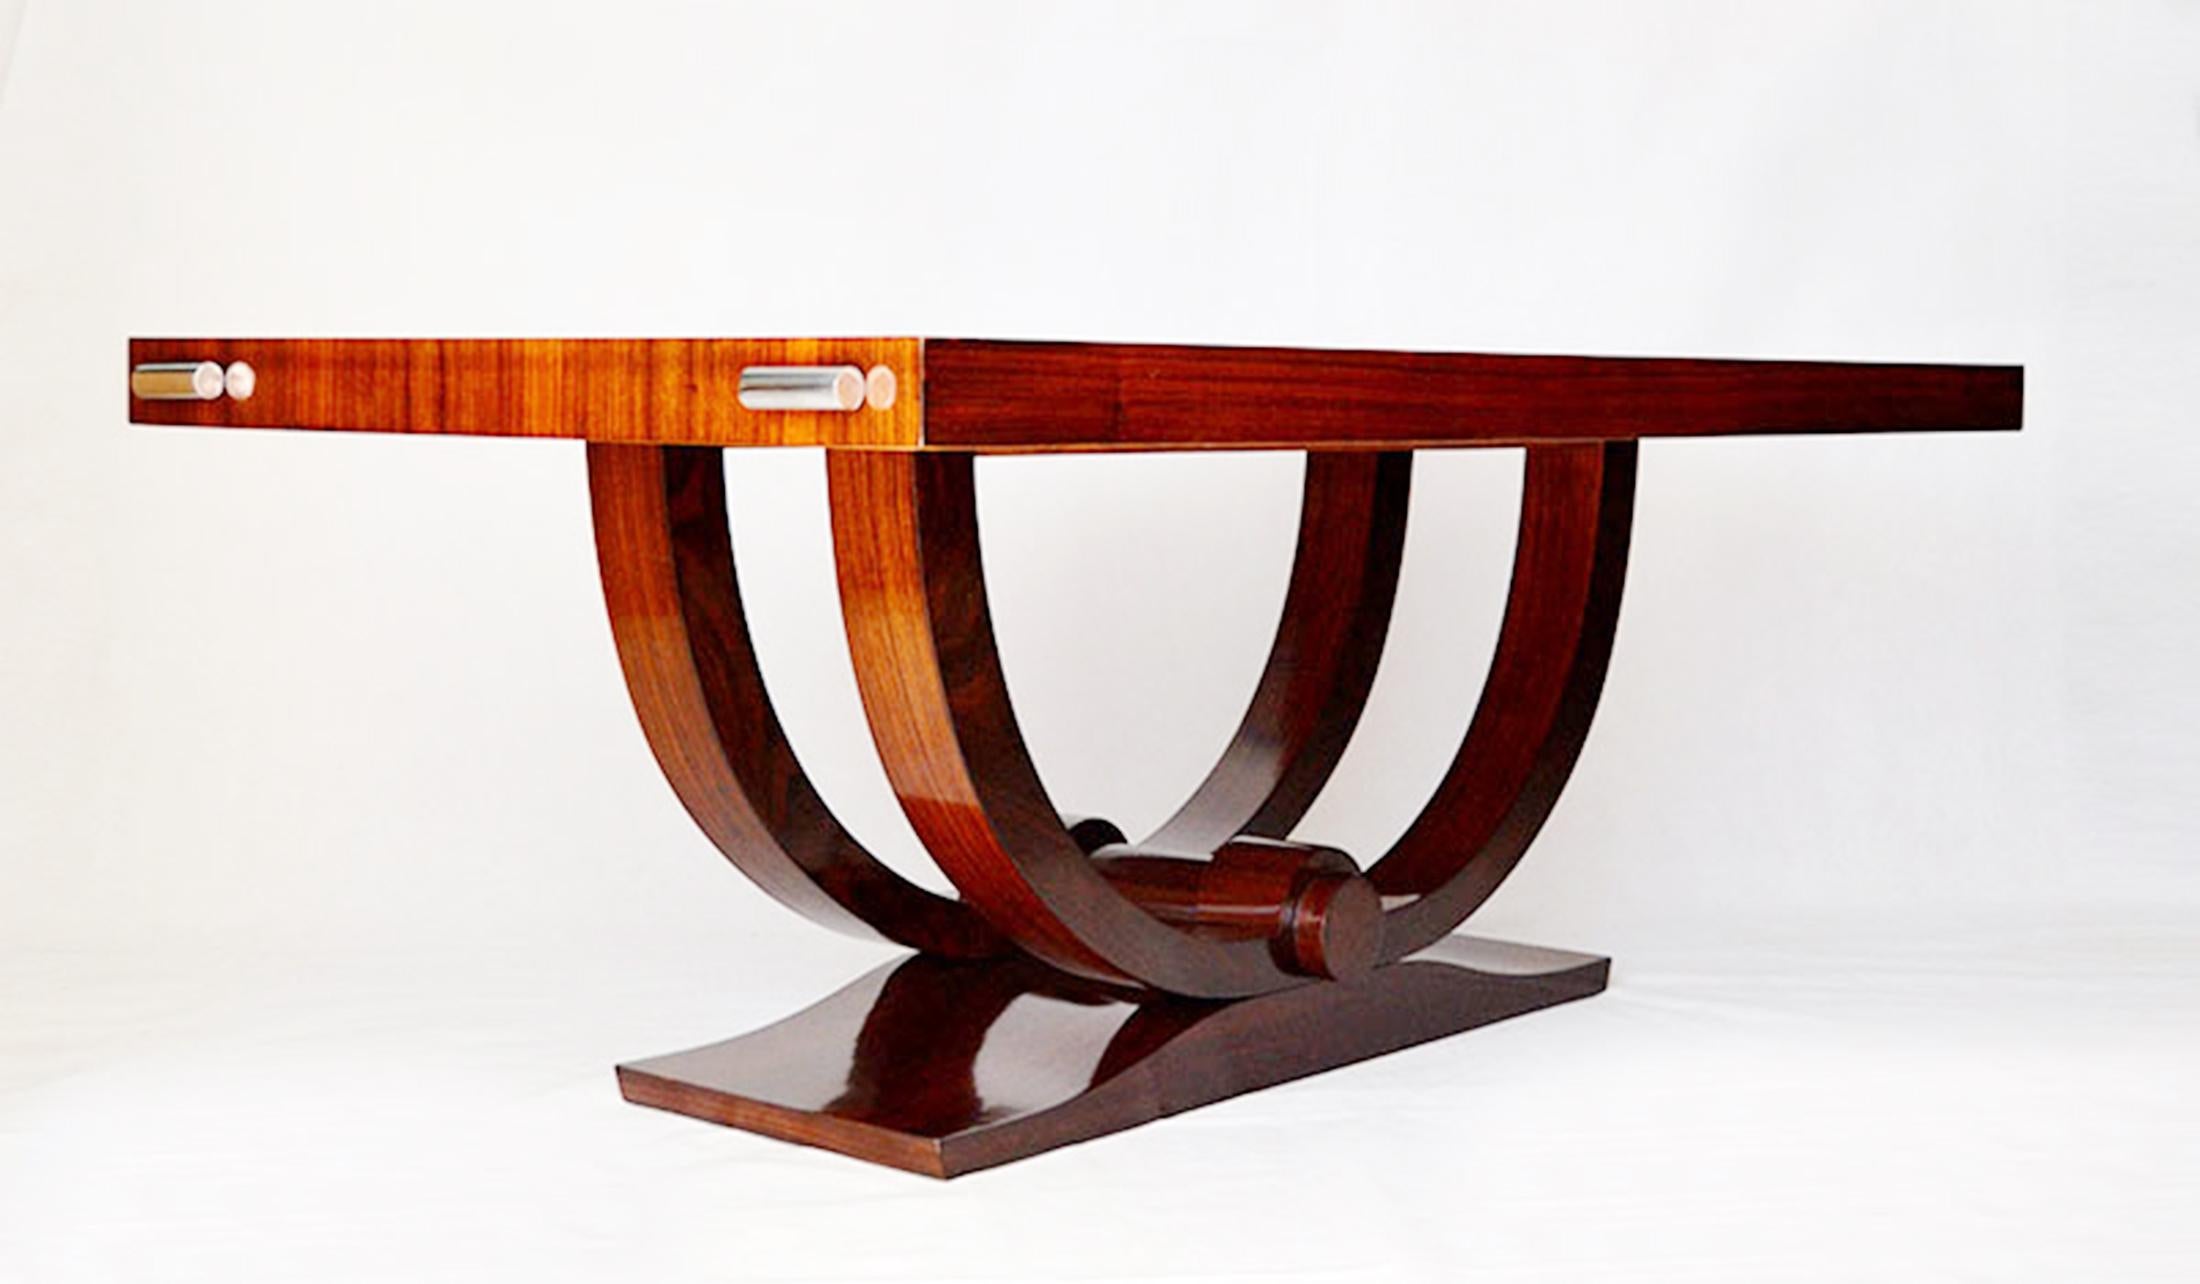 Large Art Deco table with double arch base in extendable Indian rosewood,
France,
circa 1930
Good vintage condition
Dimensions: 76 x 100 x 200 cm (50 + 50)
Documentation: attached 